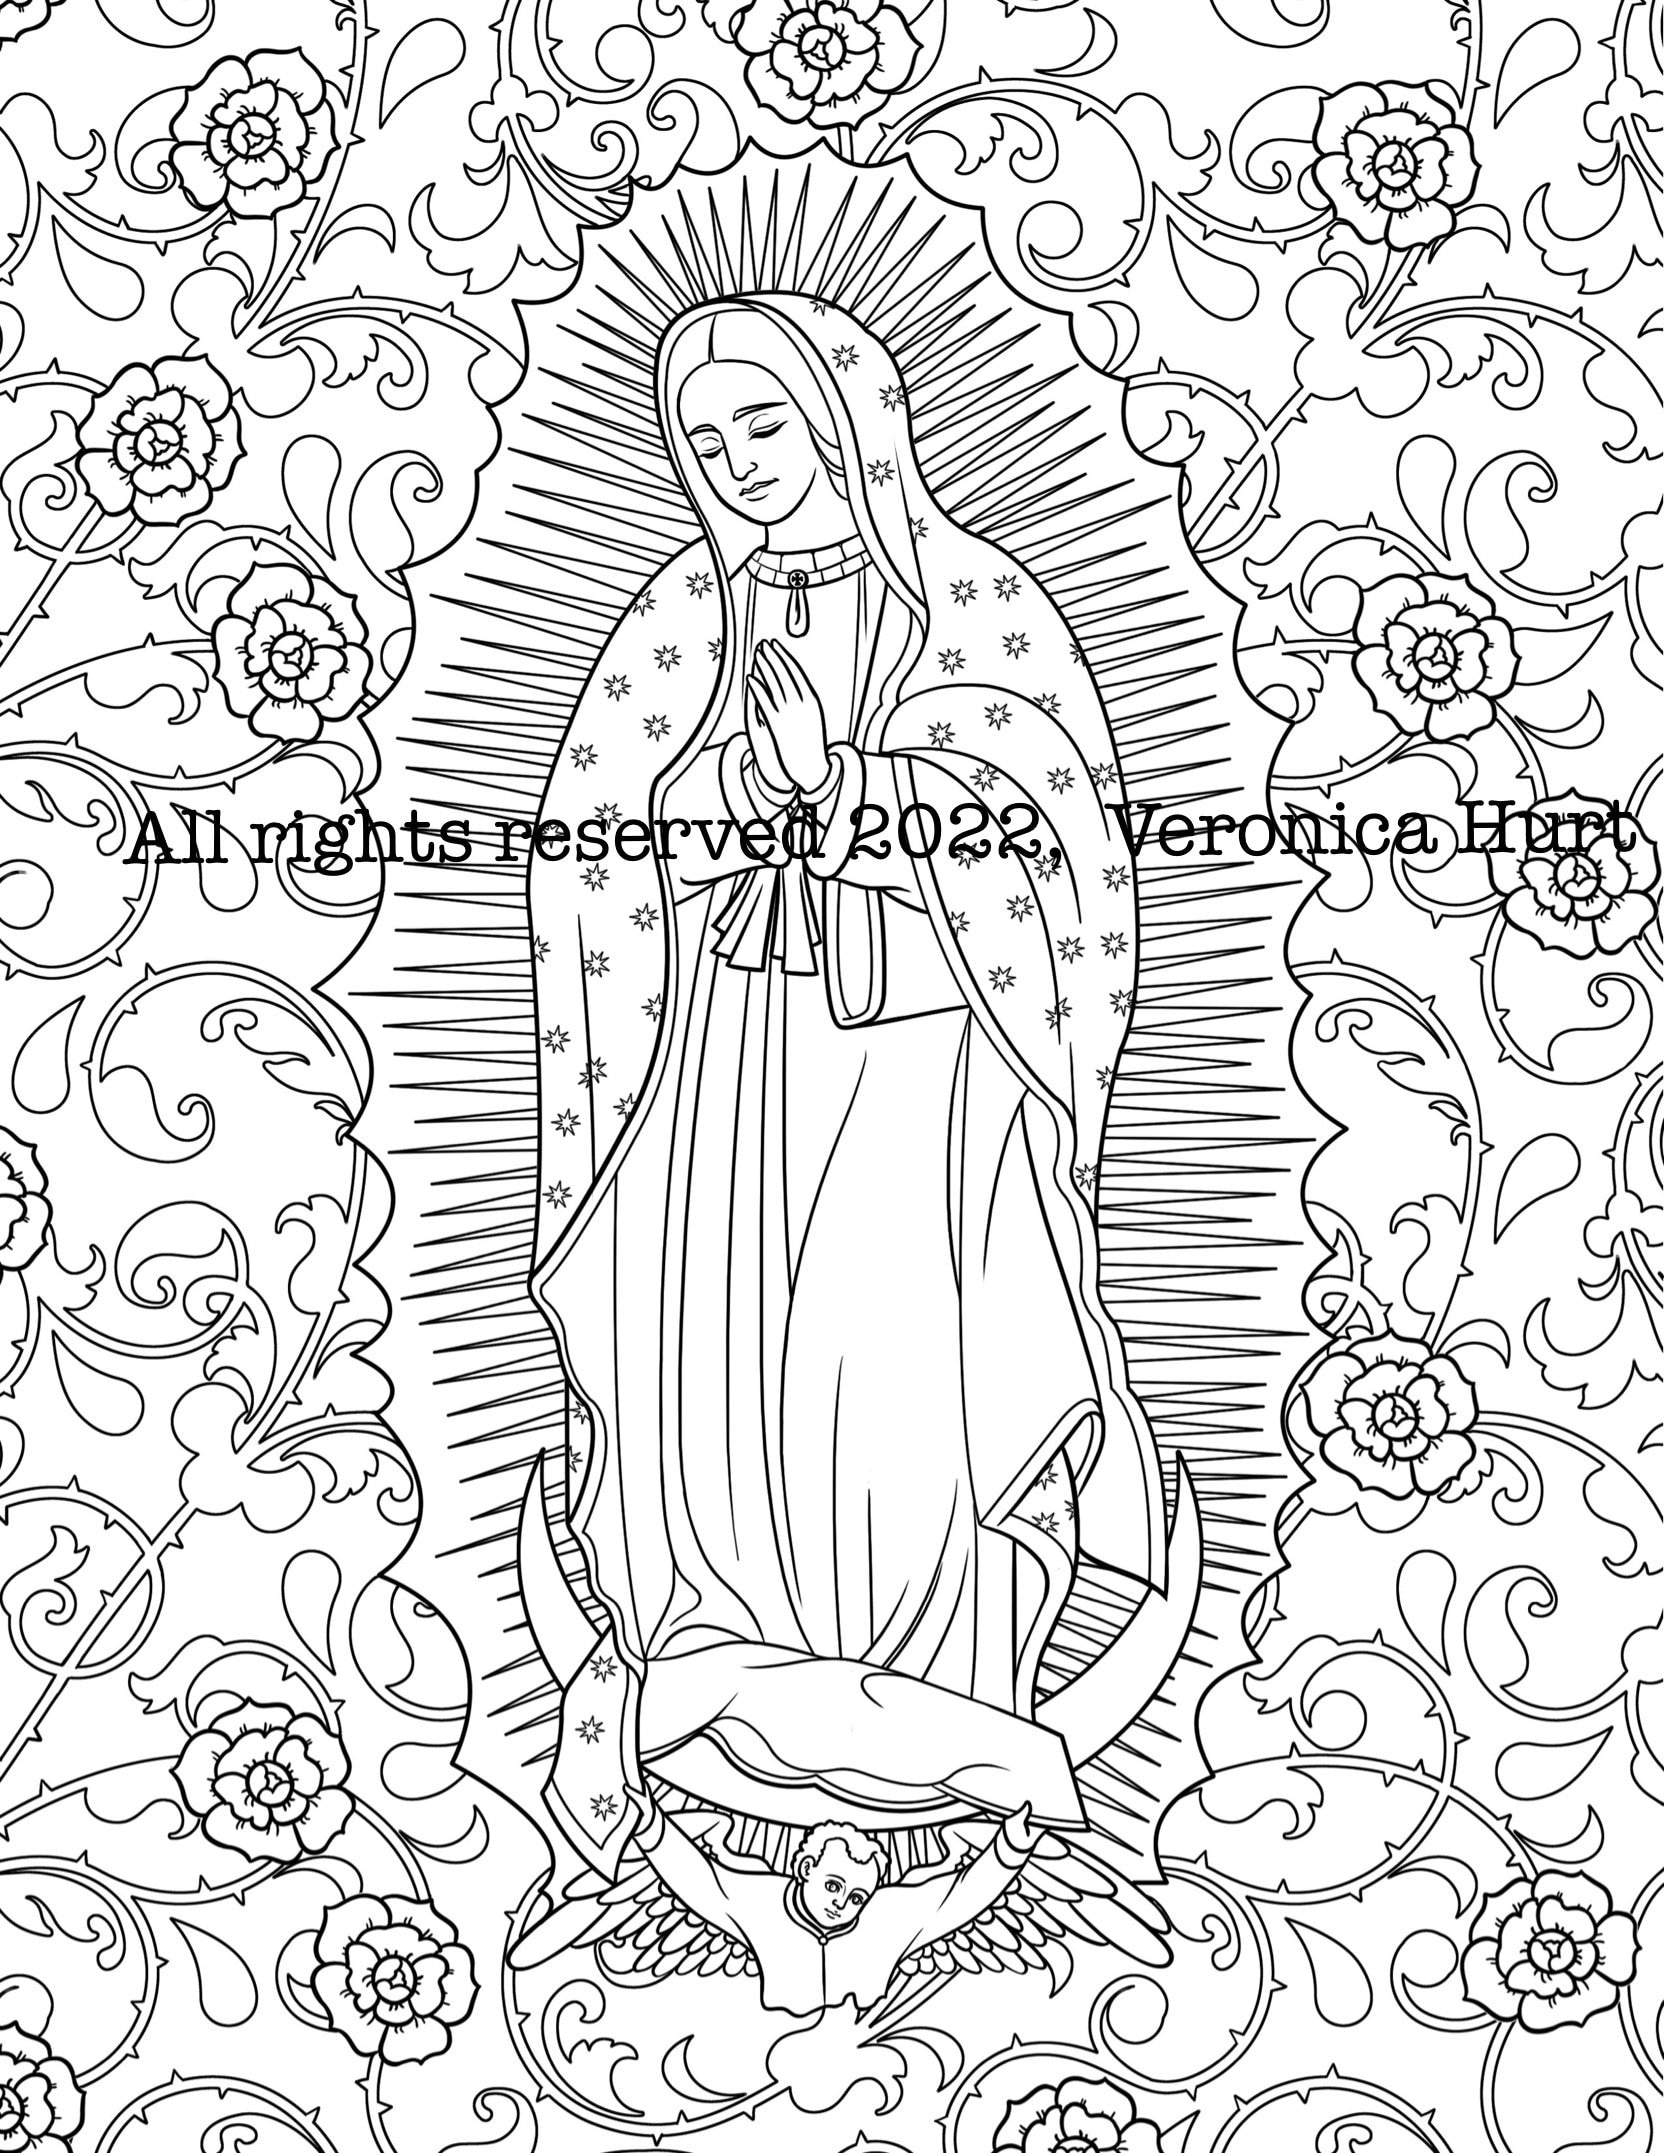 Our lady of guadalupe coloring page december saint feast day stained glass style for kids and adults download now